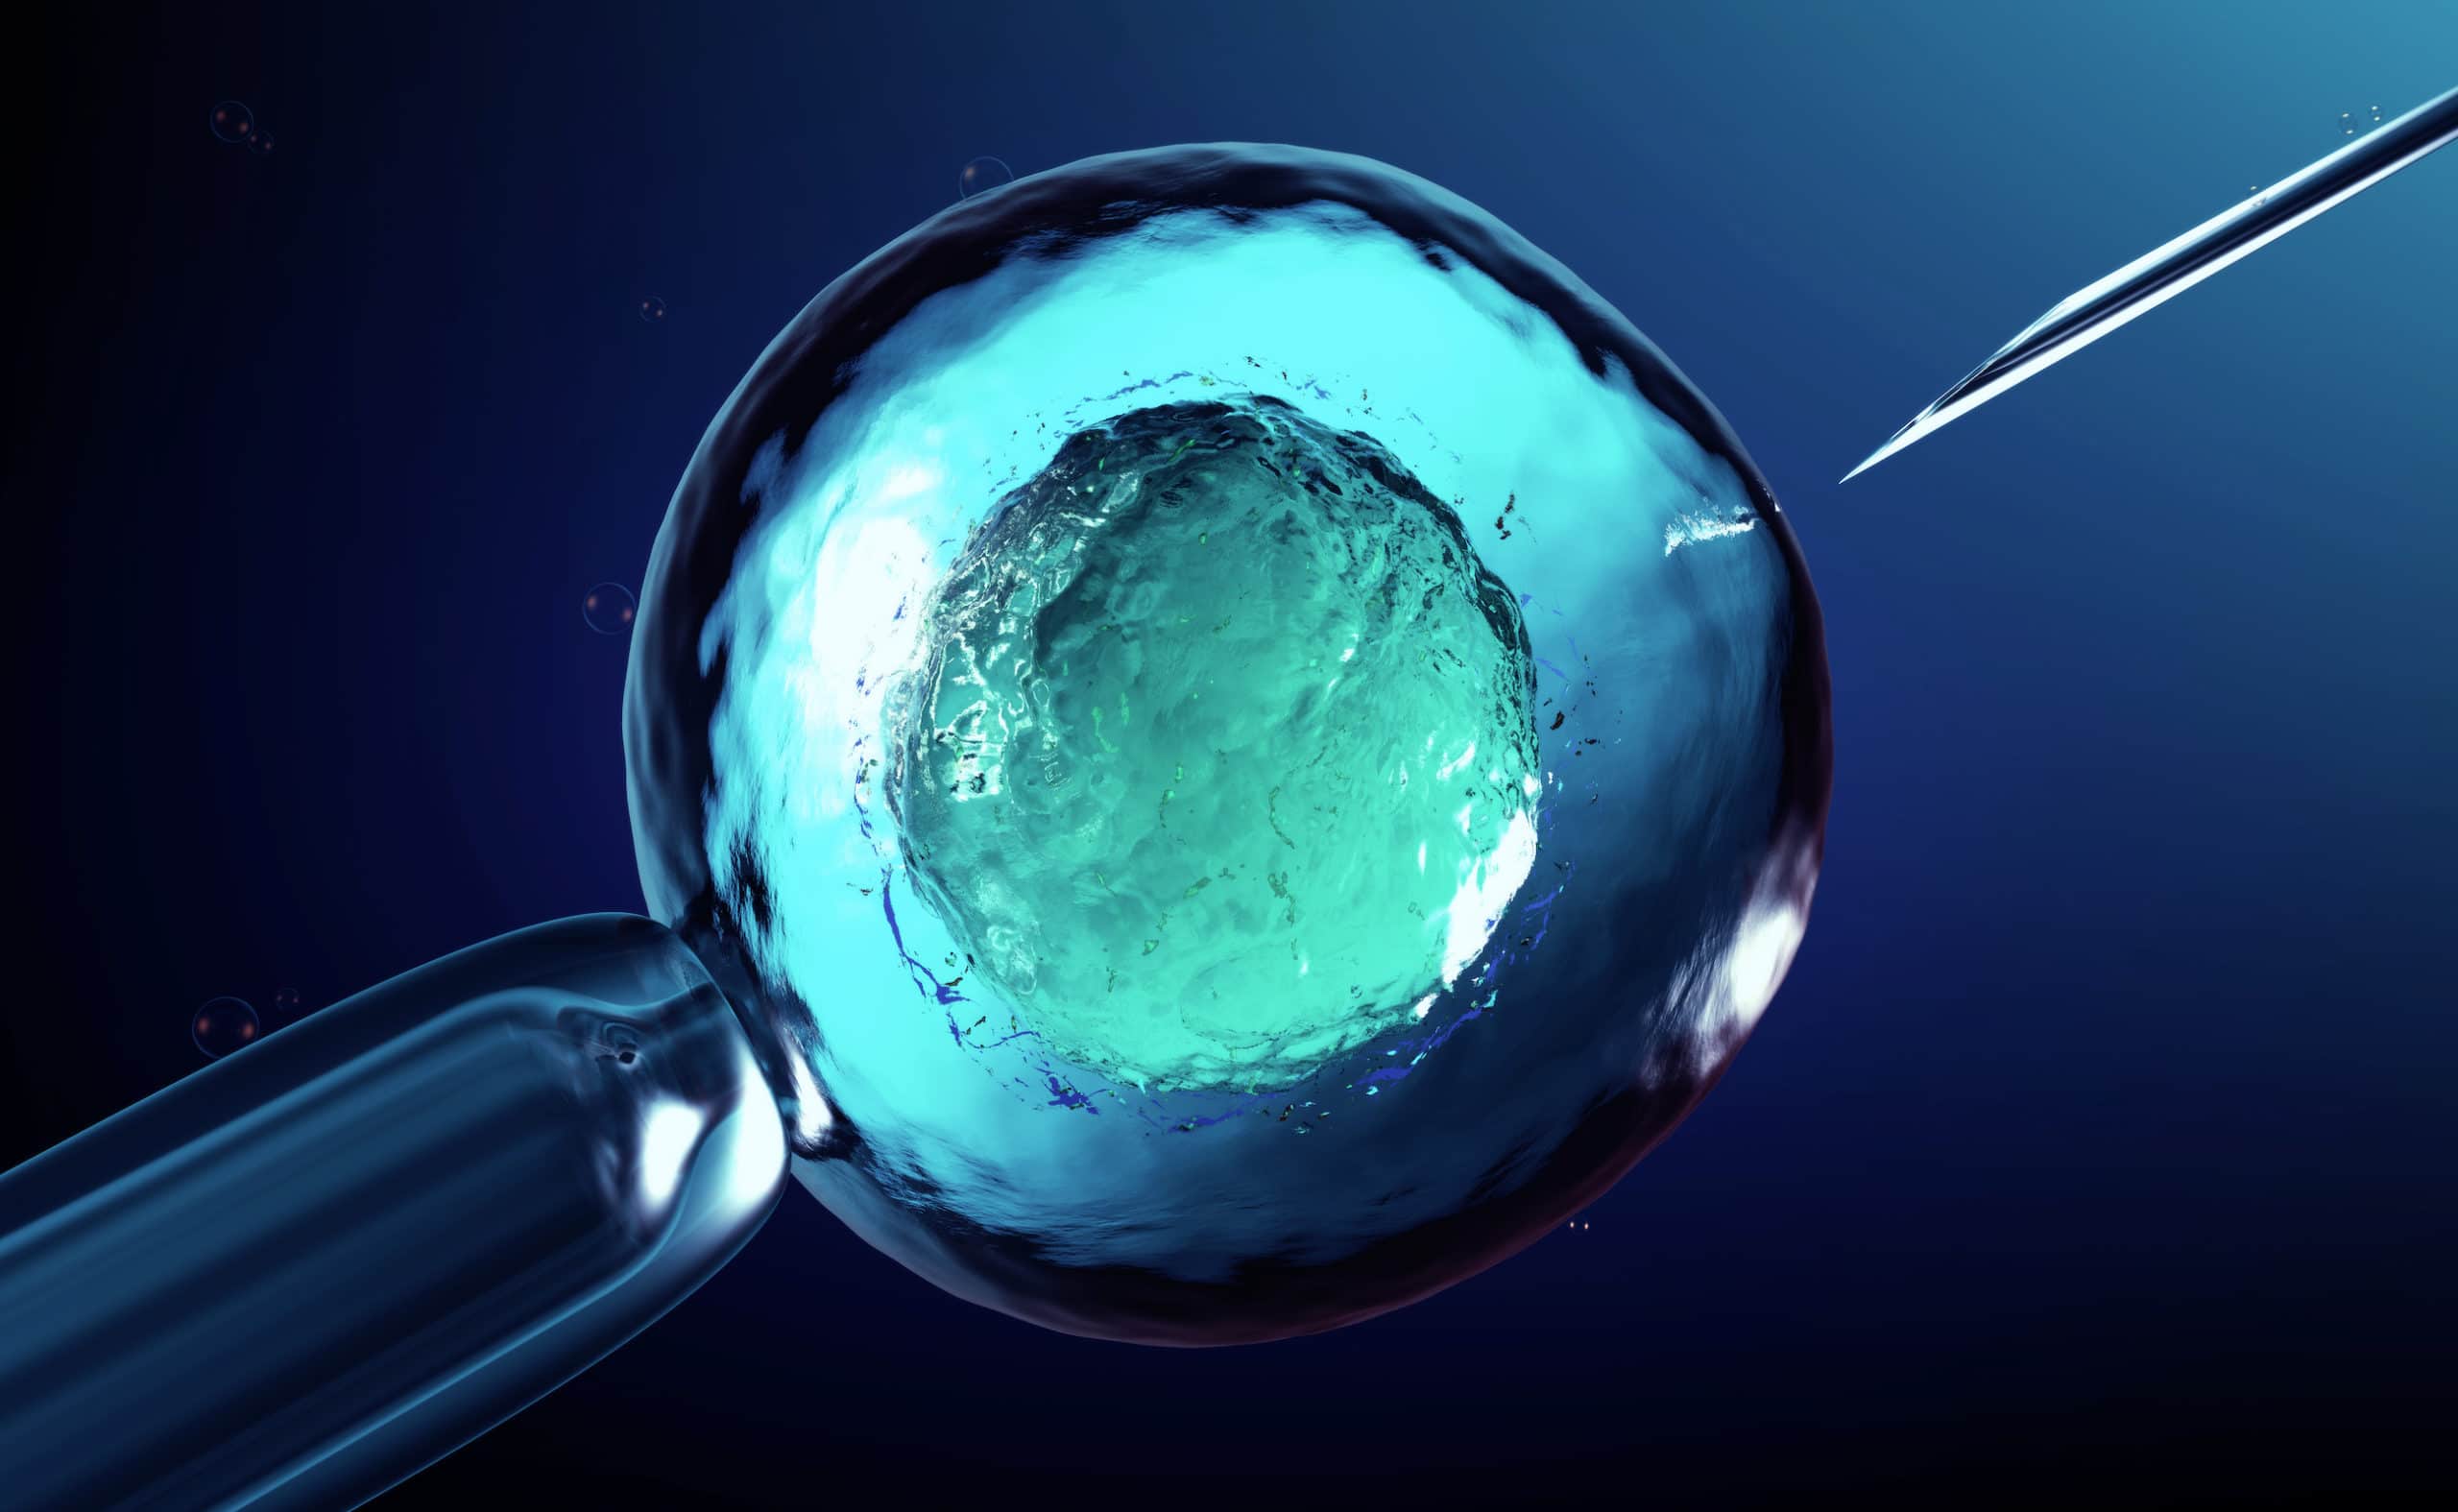 3D rendering of an artificial insemination or in-vitro fertilization of an egg cell